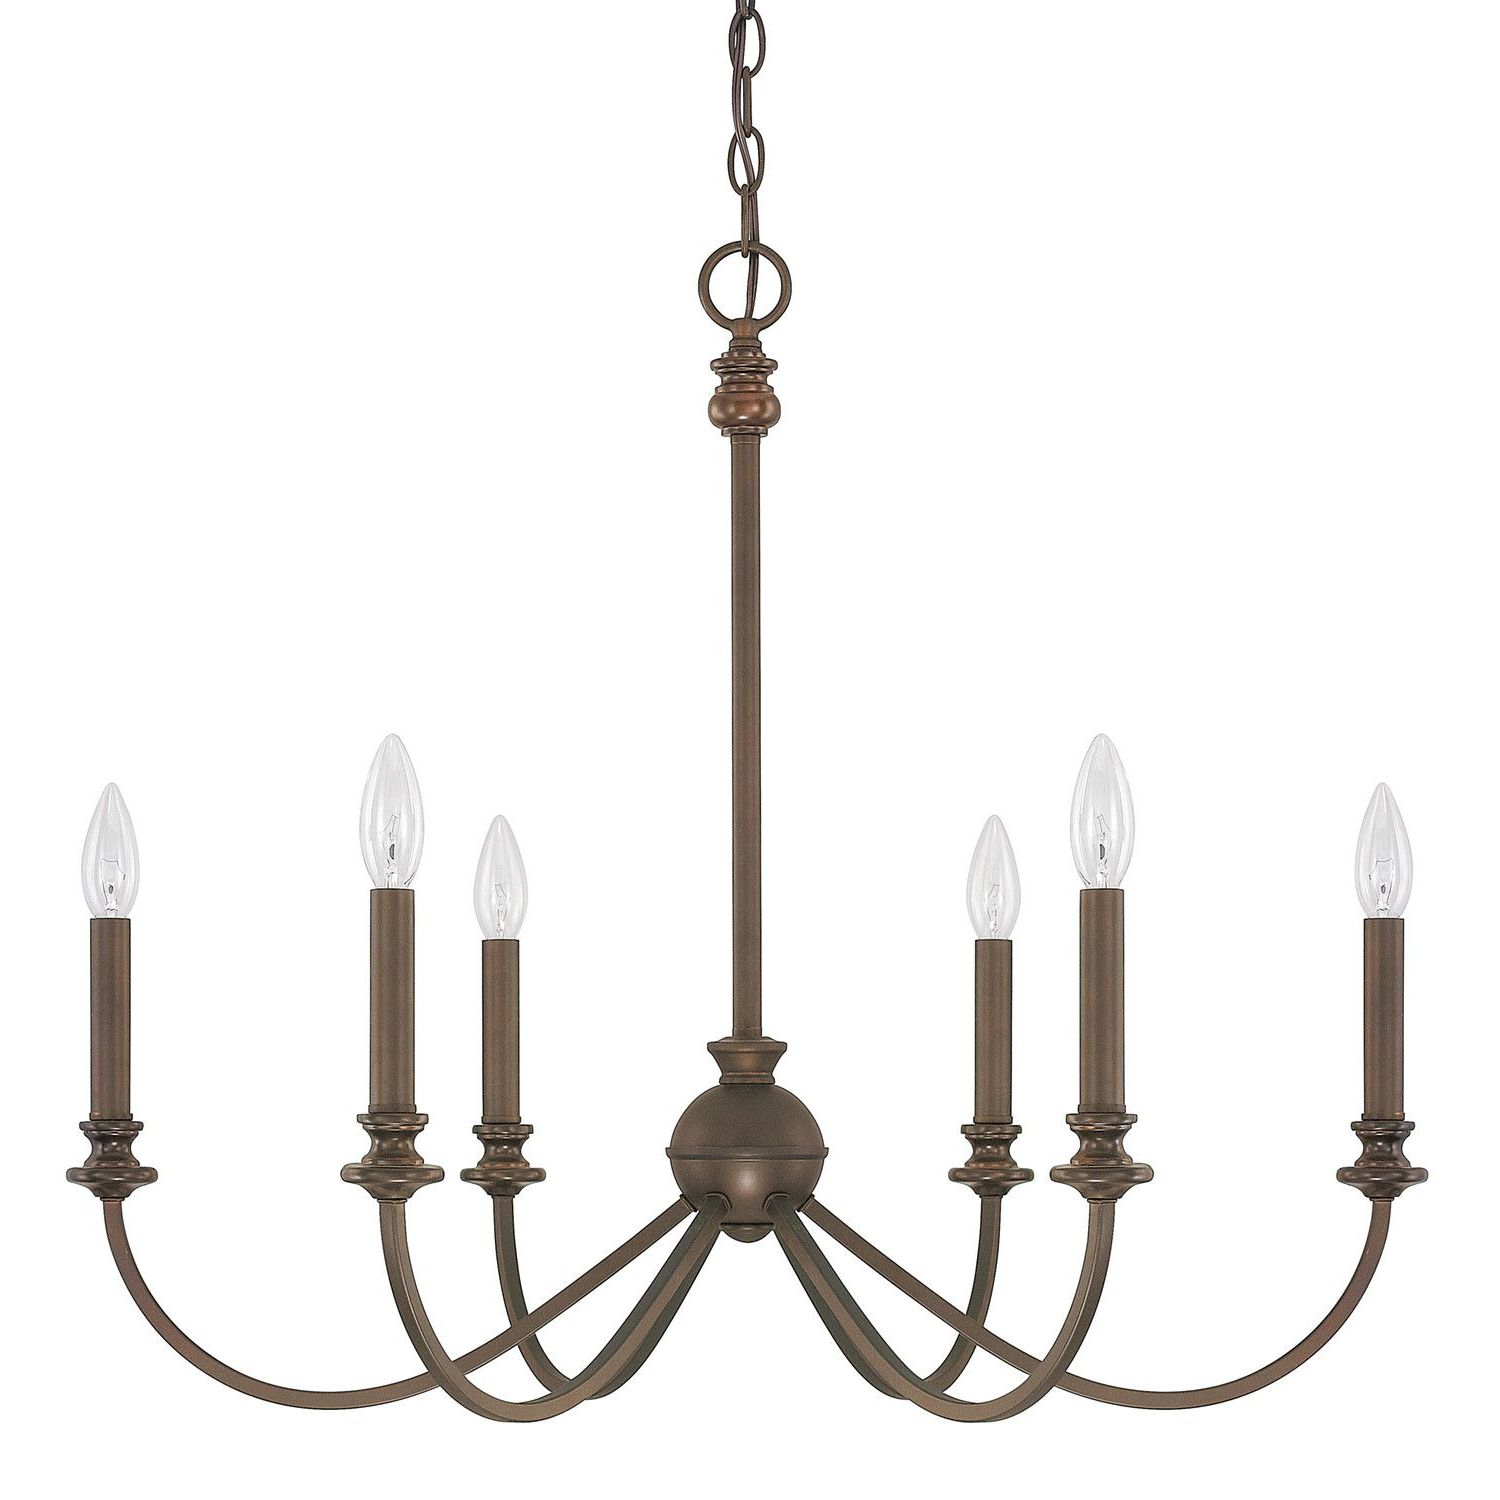 Perseus 6 Light Candle Style Chandeliers Throughout Widely Used Stanley 6 Light Candle Style Chandelier (View 18 of 25)